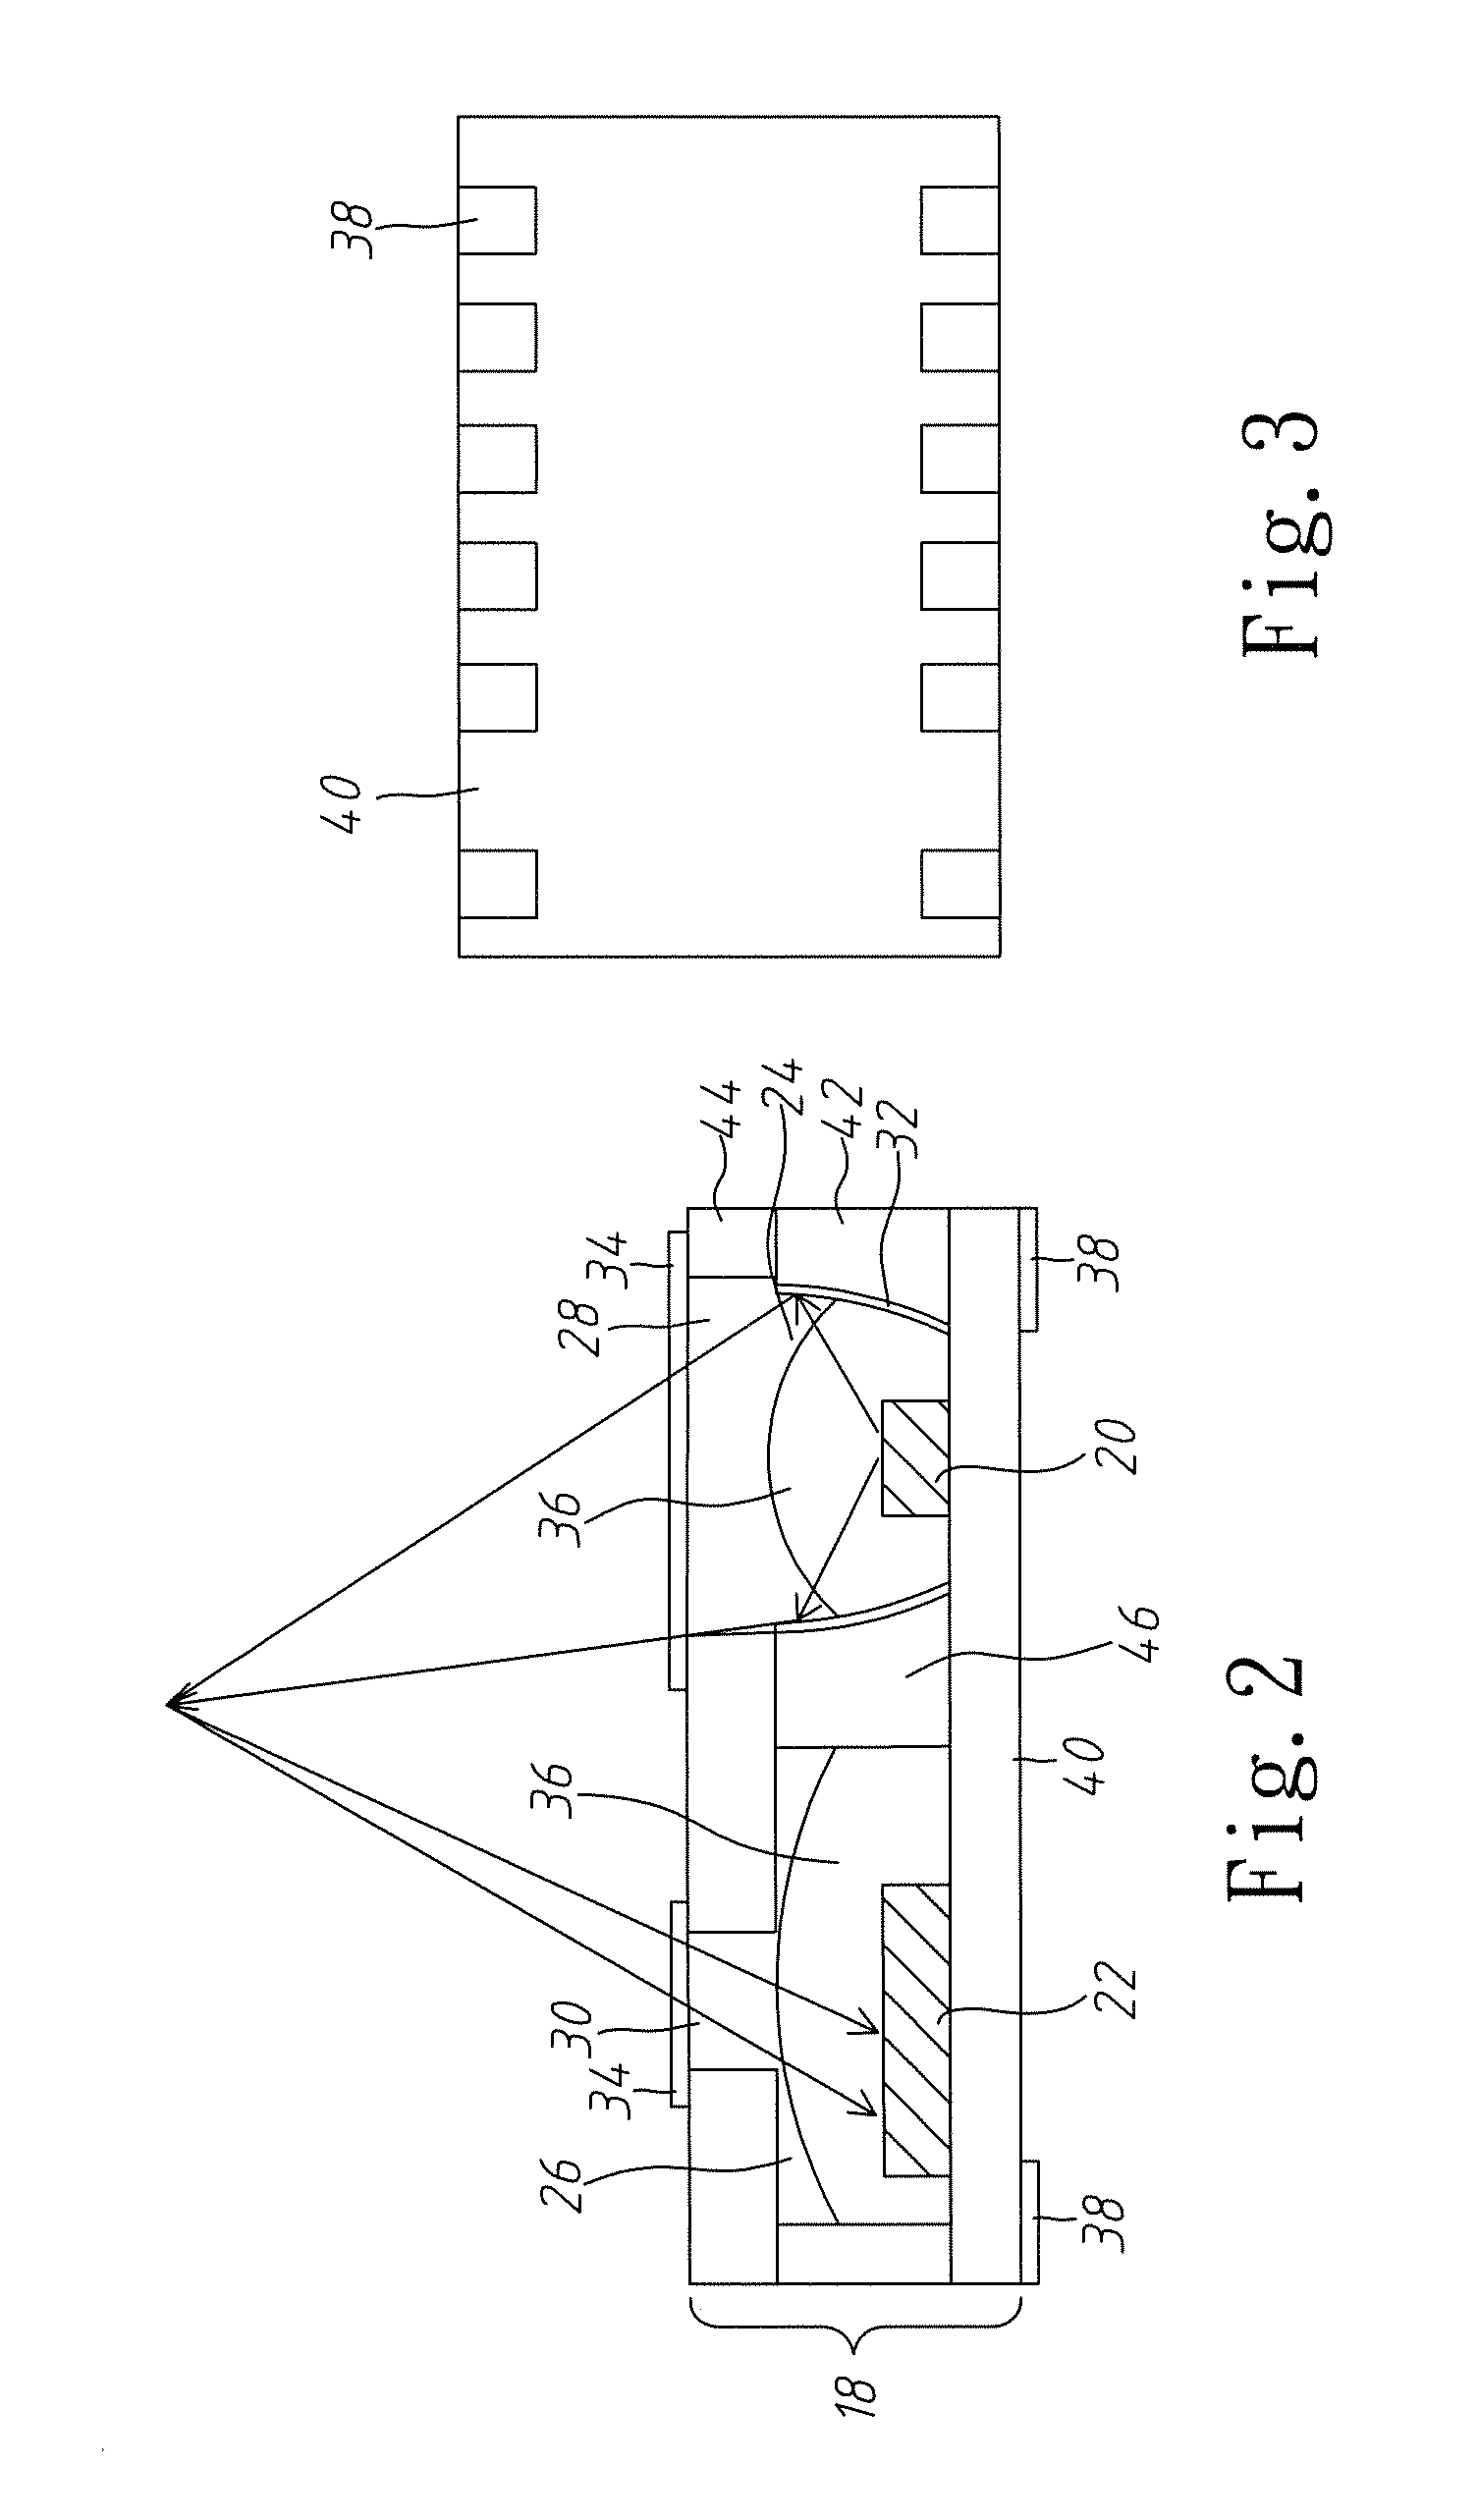 Compact sensor package structure